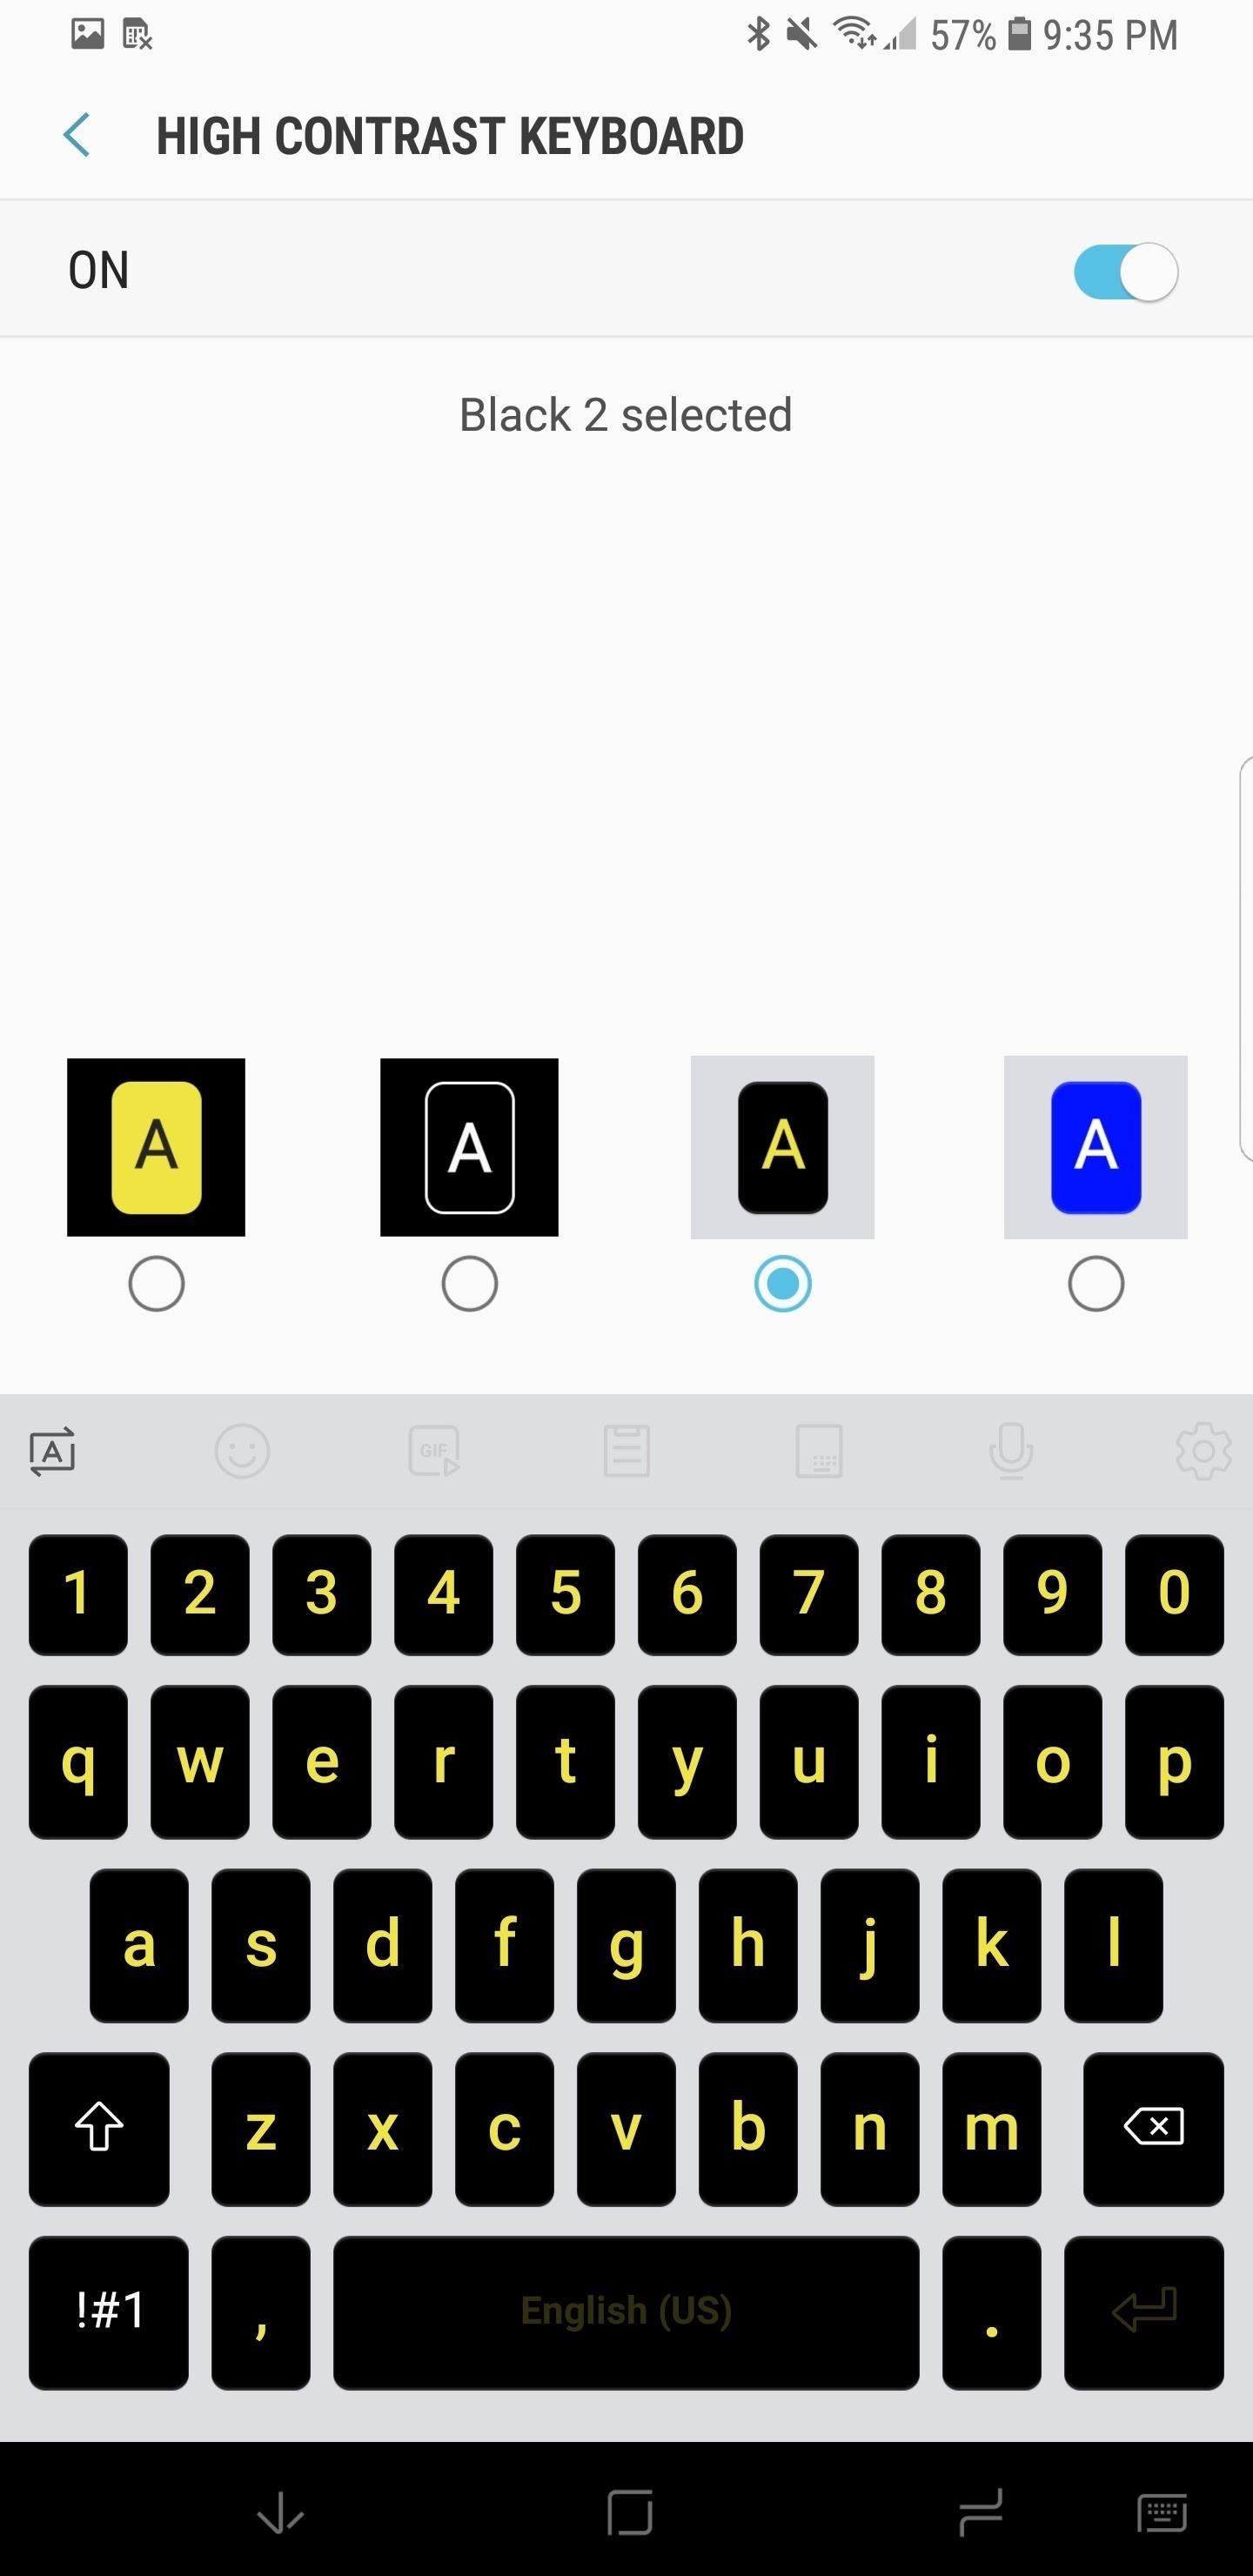 The Galaxy S9's Keyboard Has a Few New Tricks Up Its Sleeve Thanks to Oreo